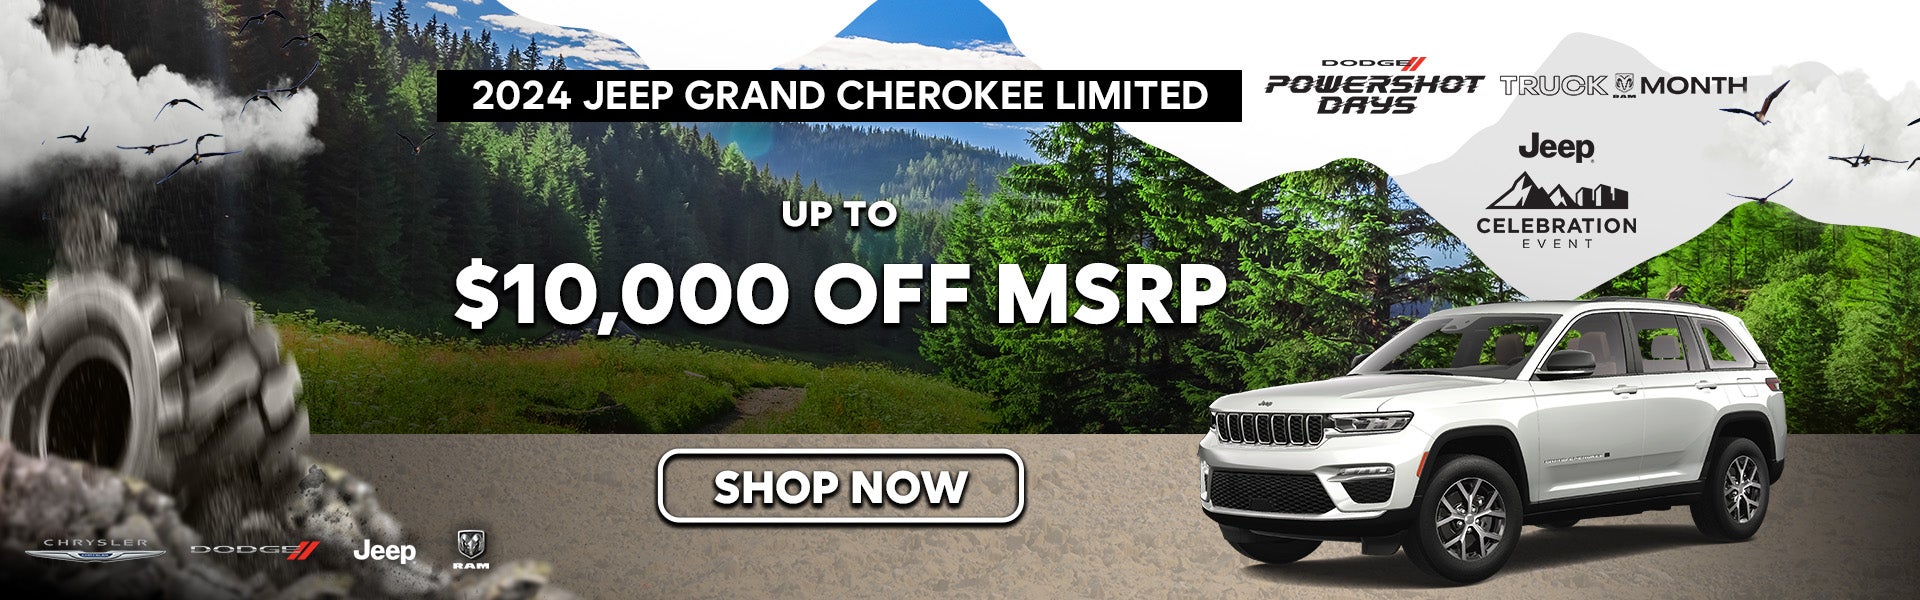 2024 JEEP GRAND CHEROKEE SPECIAL OFFER